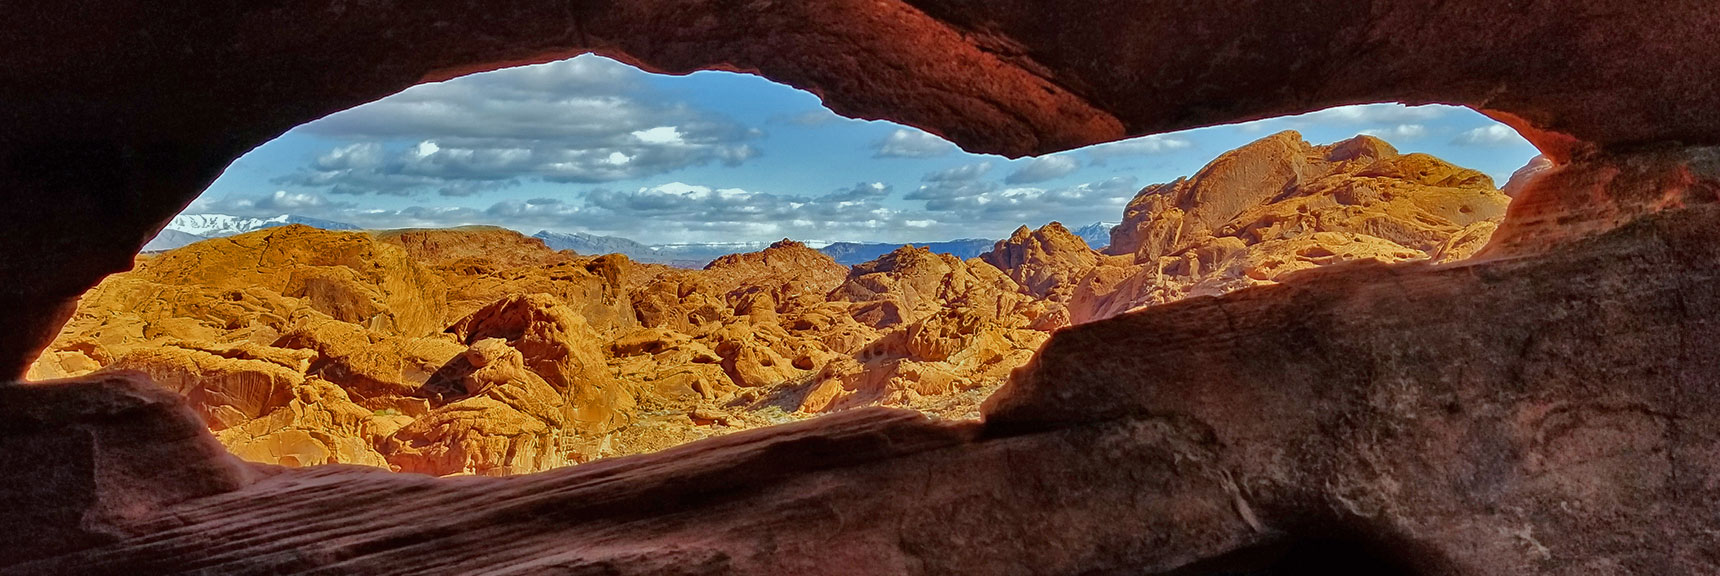 Rock Window View Beyond Mouse's Tank Trail in Valley of Fire State Park, Nevada